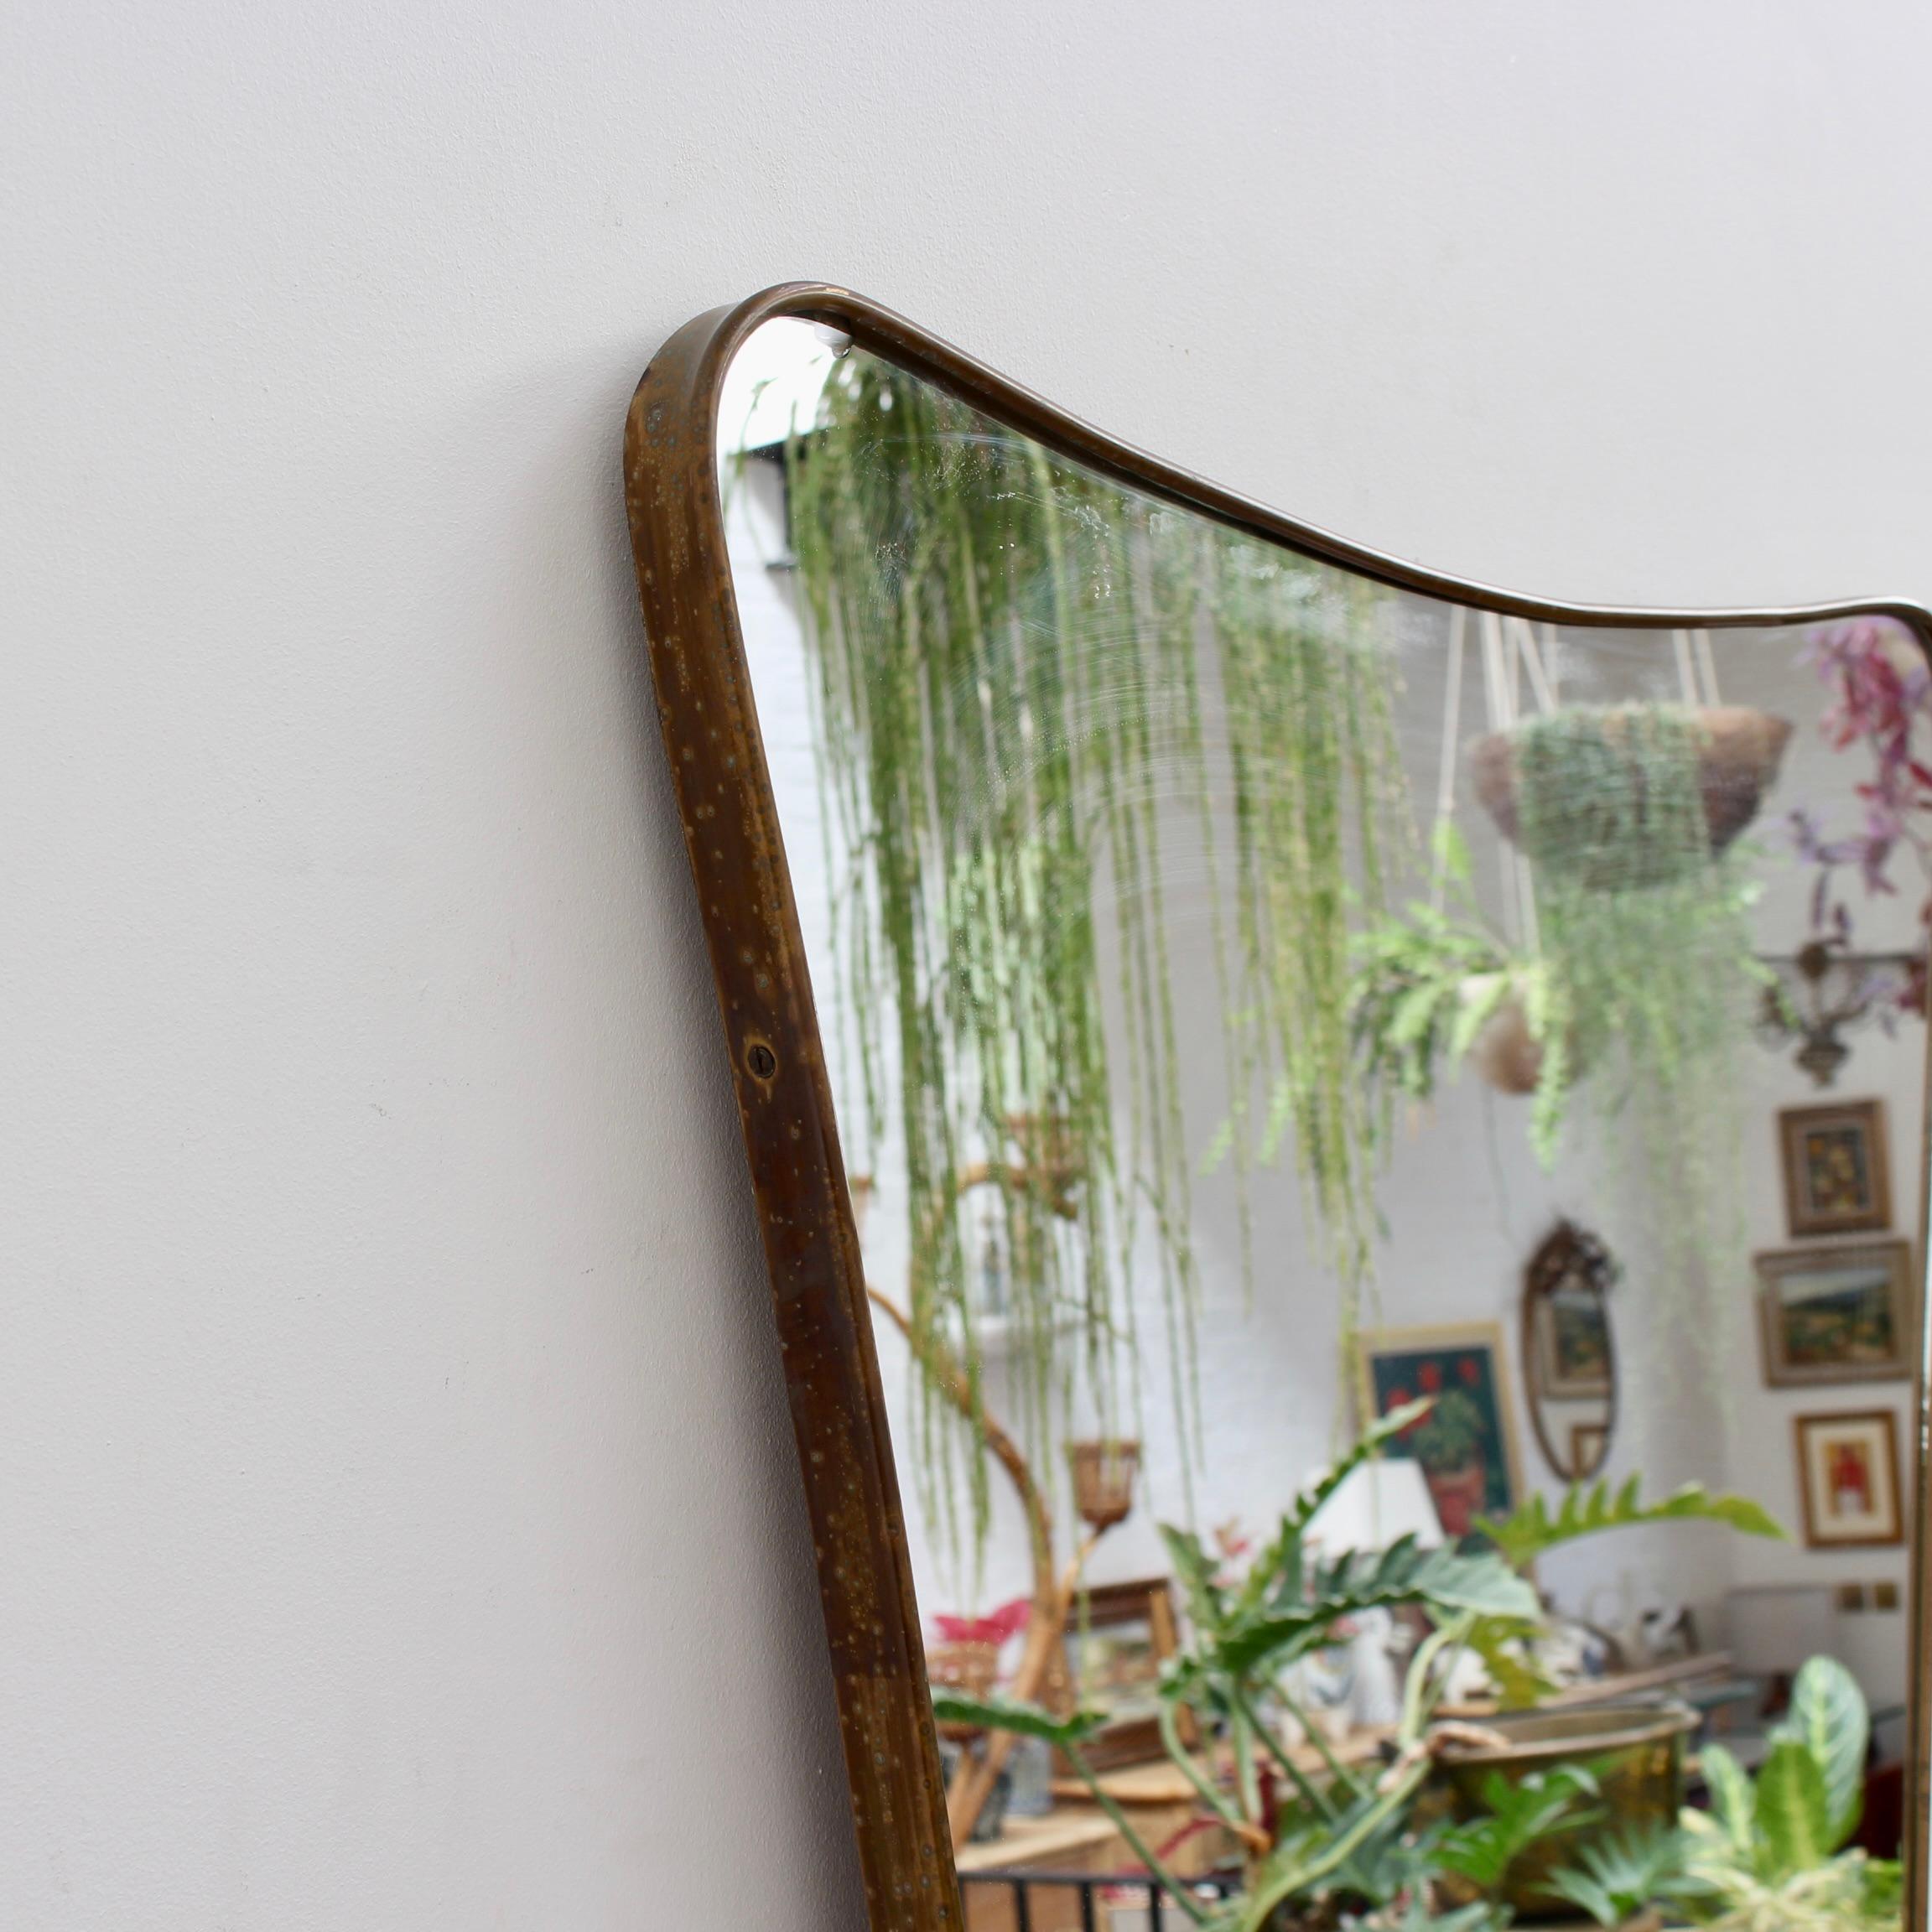 Mid-20th Century Mid-Century Italian Wall Mirror with Brass Frame (circa 1950s) - Large For Sale